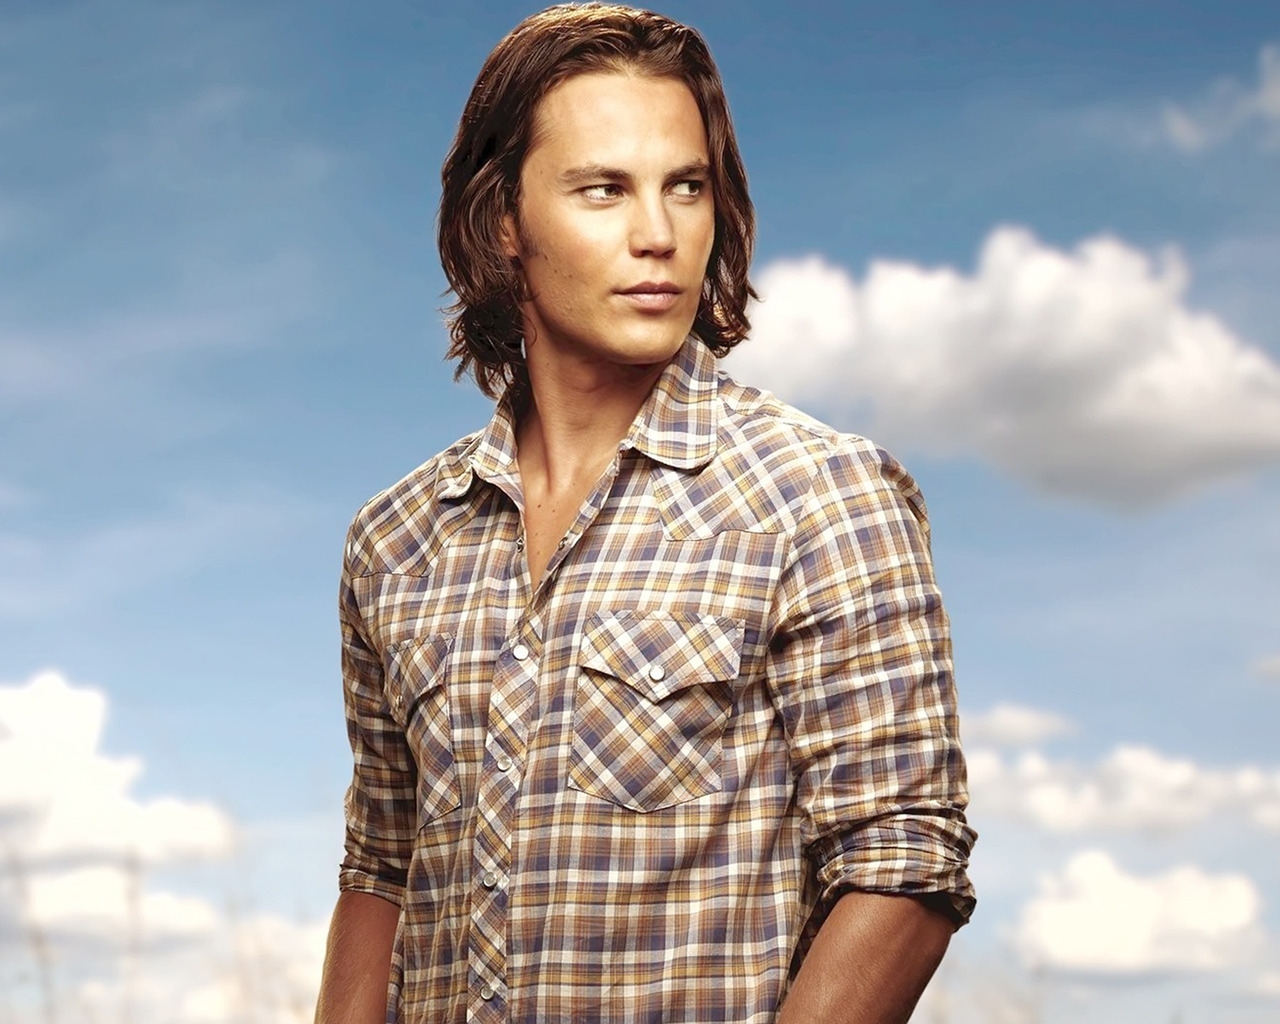 Cool Taylor Kitsch for 1280 x 1024 resolution